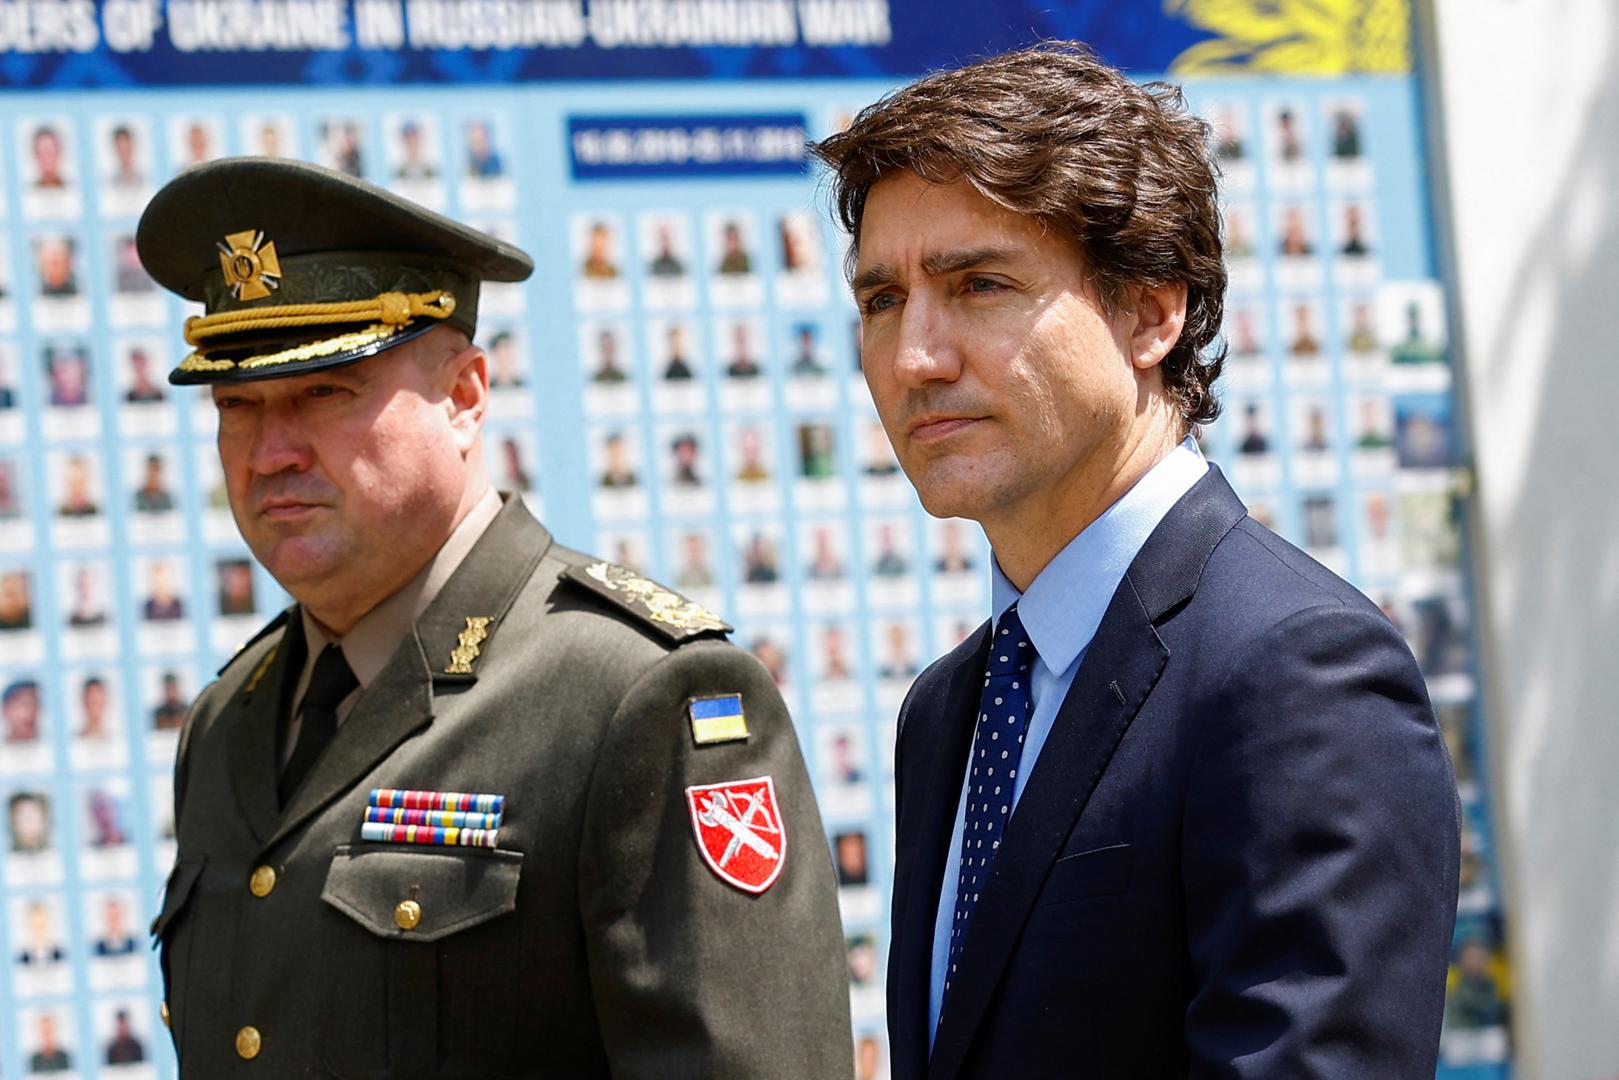 Canadian Prime Minister Justin Trudeau visits the Wall of Remembrance to pay tribute to killed Ukrainian soldiers, amid Russia's attack on Ukraine, in Kyiv, Ukraine June 10, 2023. REUTERS/Valentyn Ogirenko/Pool Photo: VALENTYN OGIRENKO/REUTERS